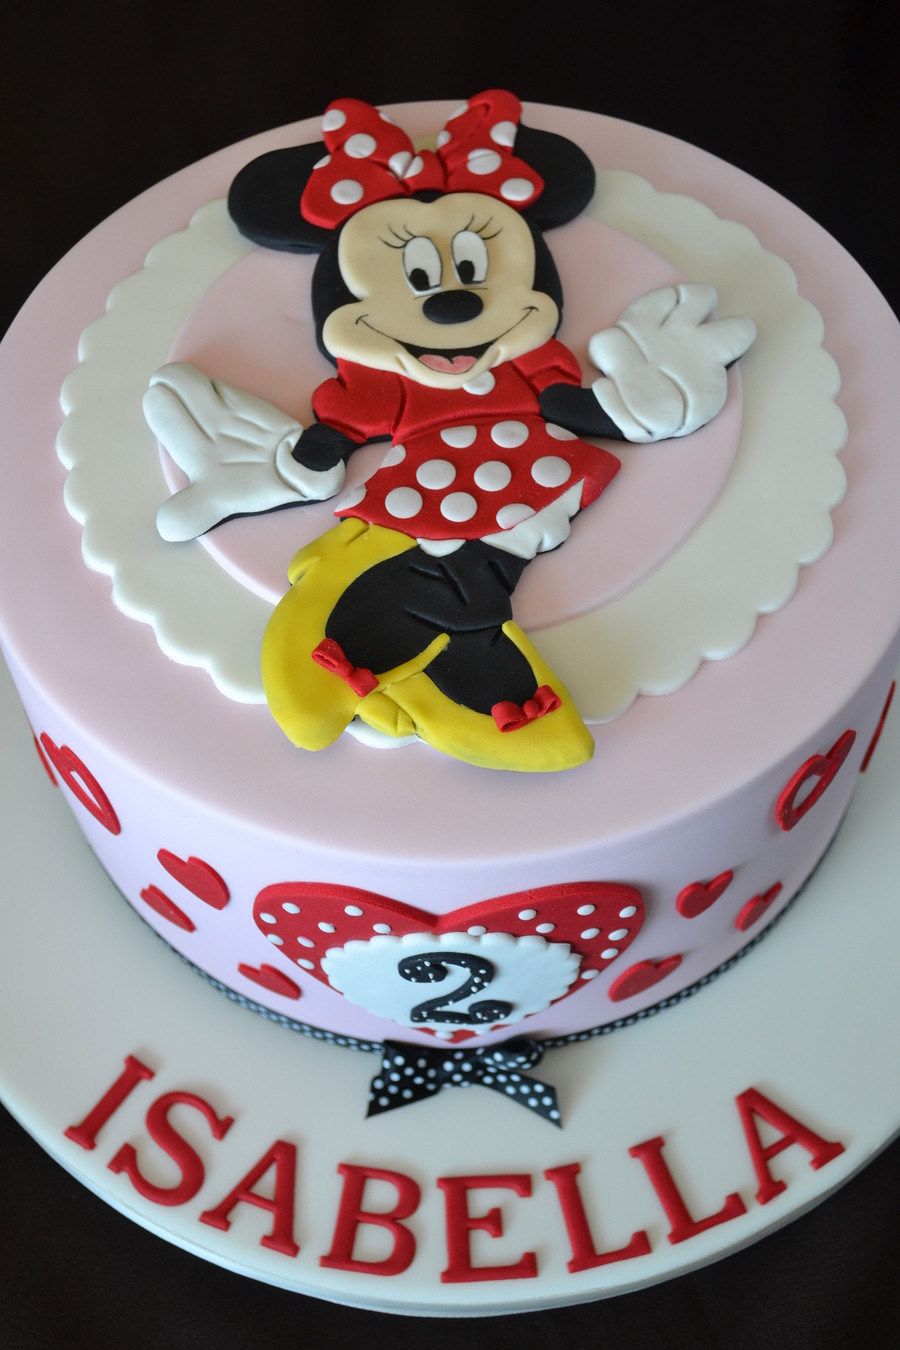 Cute Birthday Cakes
 A Cute Birthday Cake With The Ever Popular Minnie Mouse